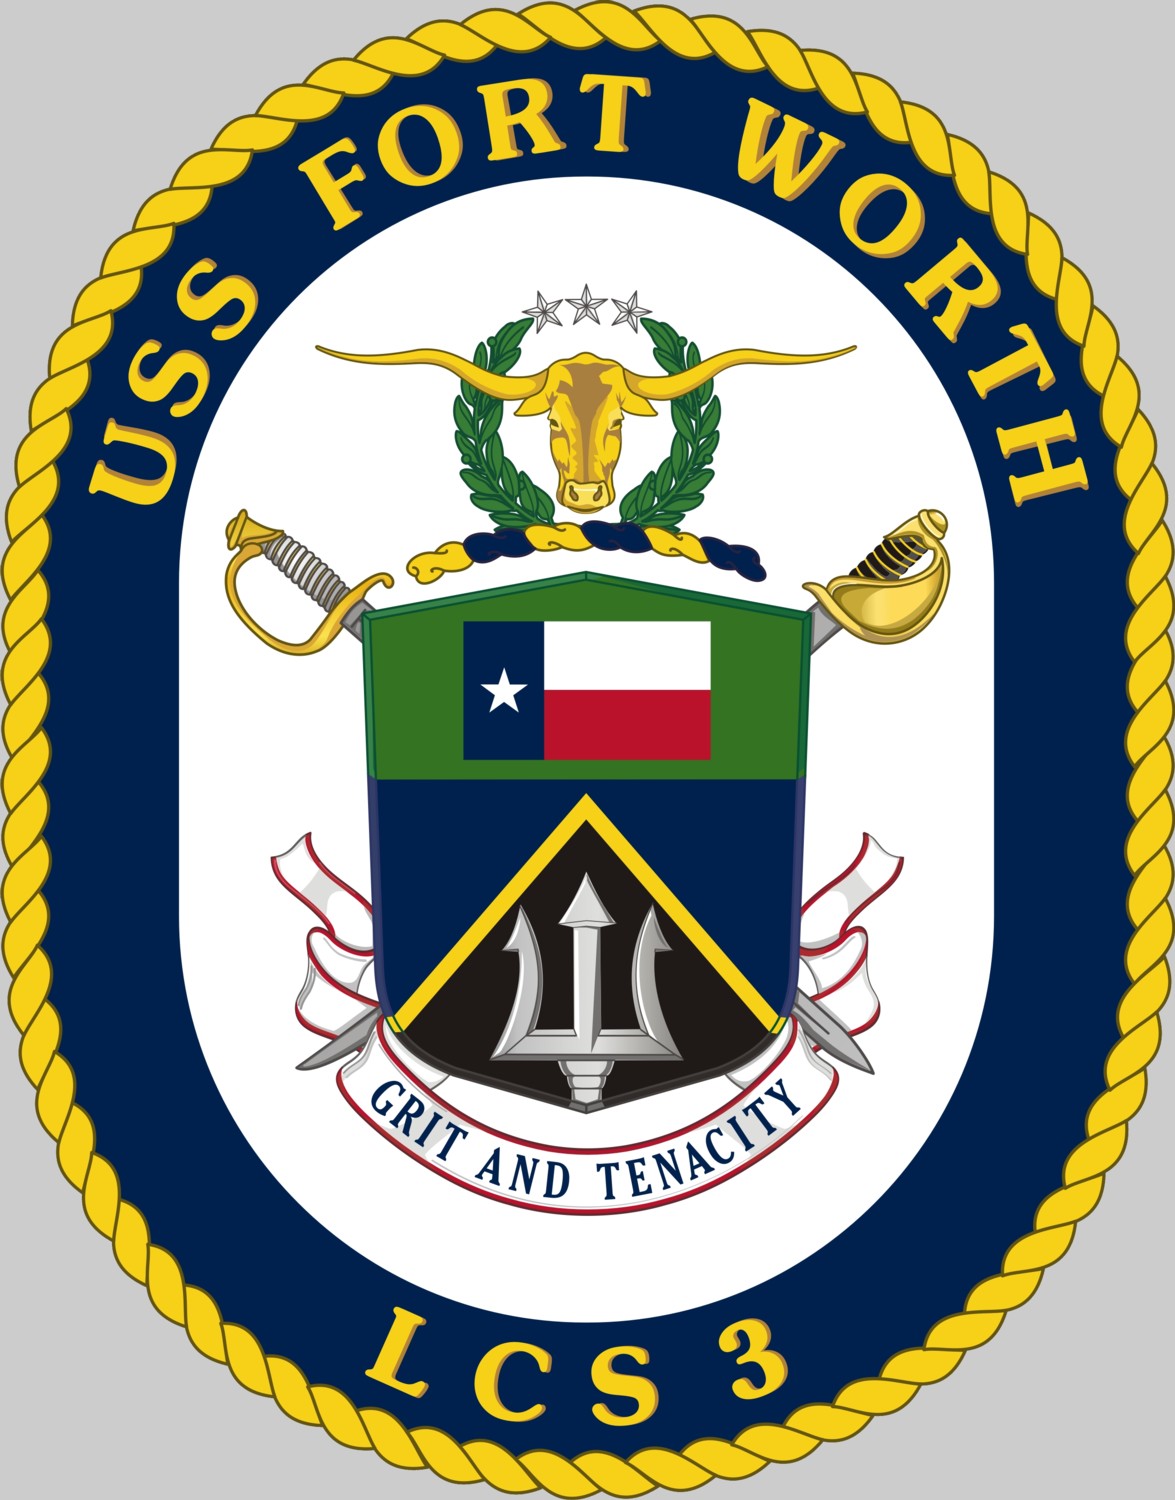 lcs-3 uss fort worth insignia crest patch badge freedom class littoral combat ship us navy 02c